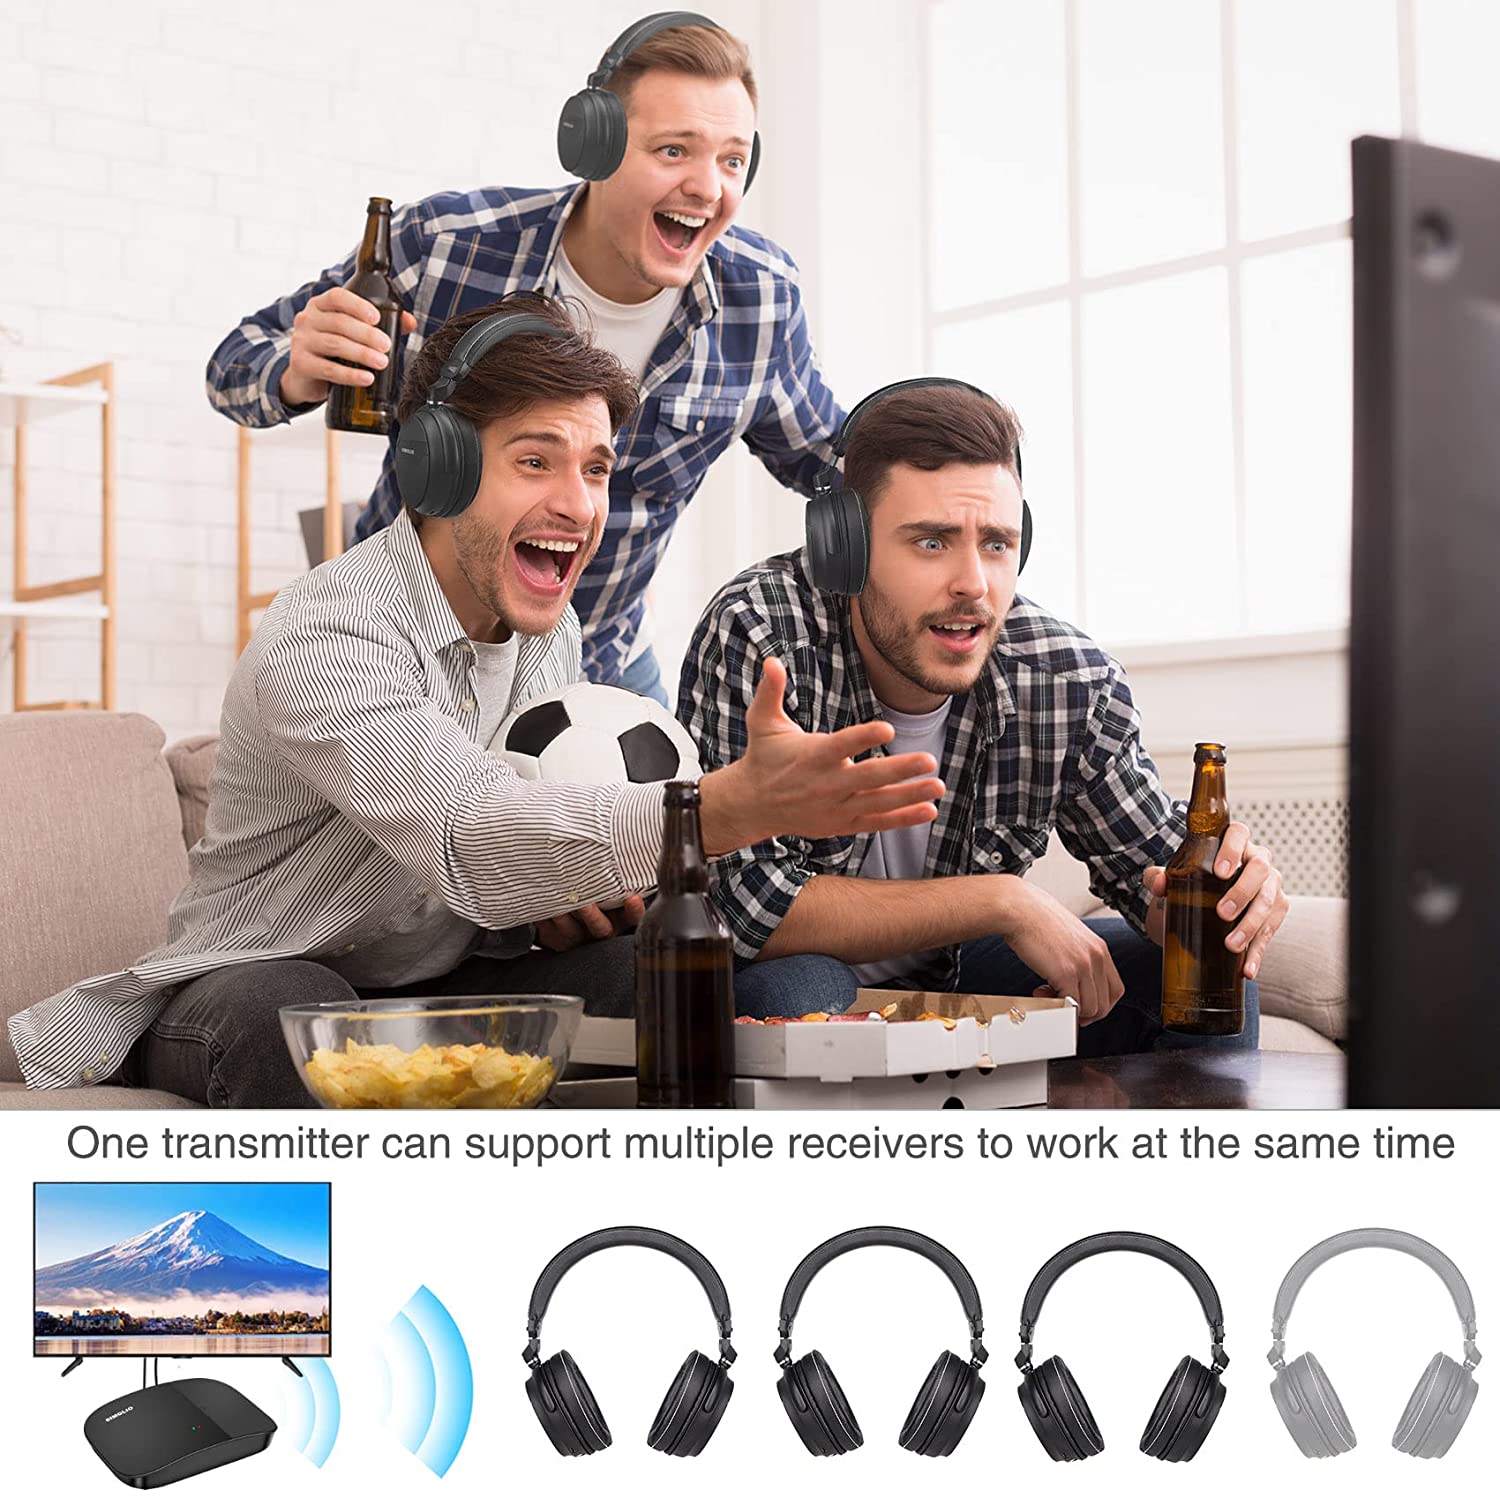 SIMOLIO SM-826D wireless headset for tv watching support multiple headphones simultaneously